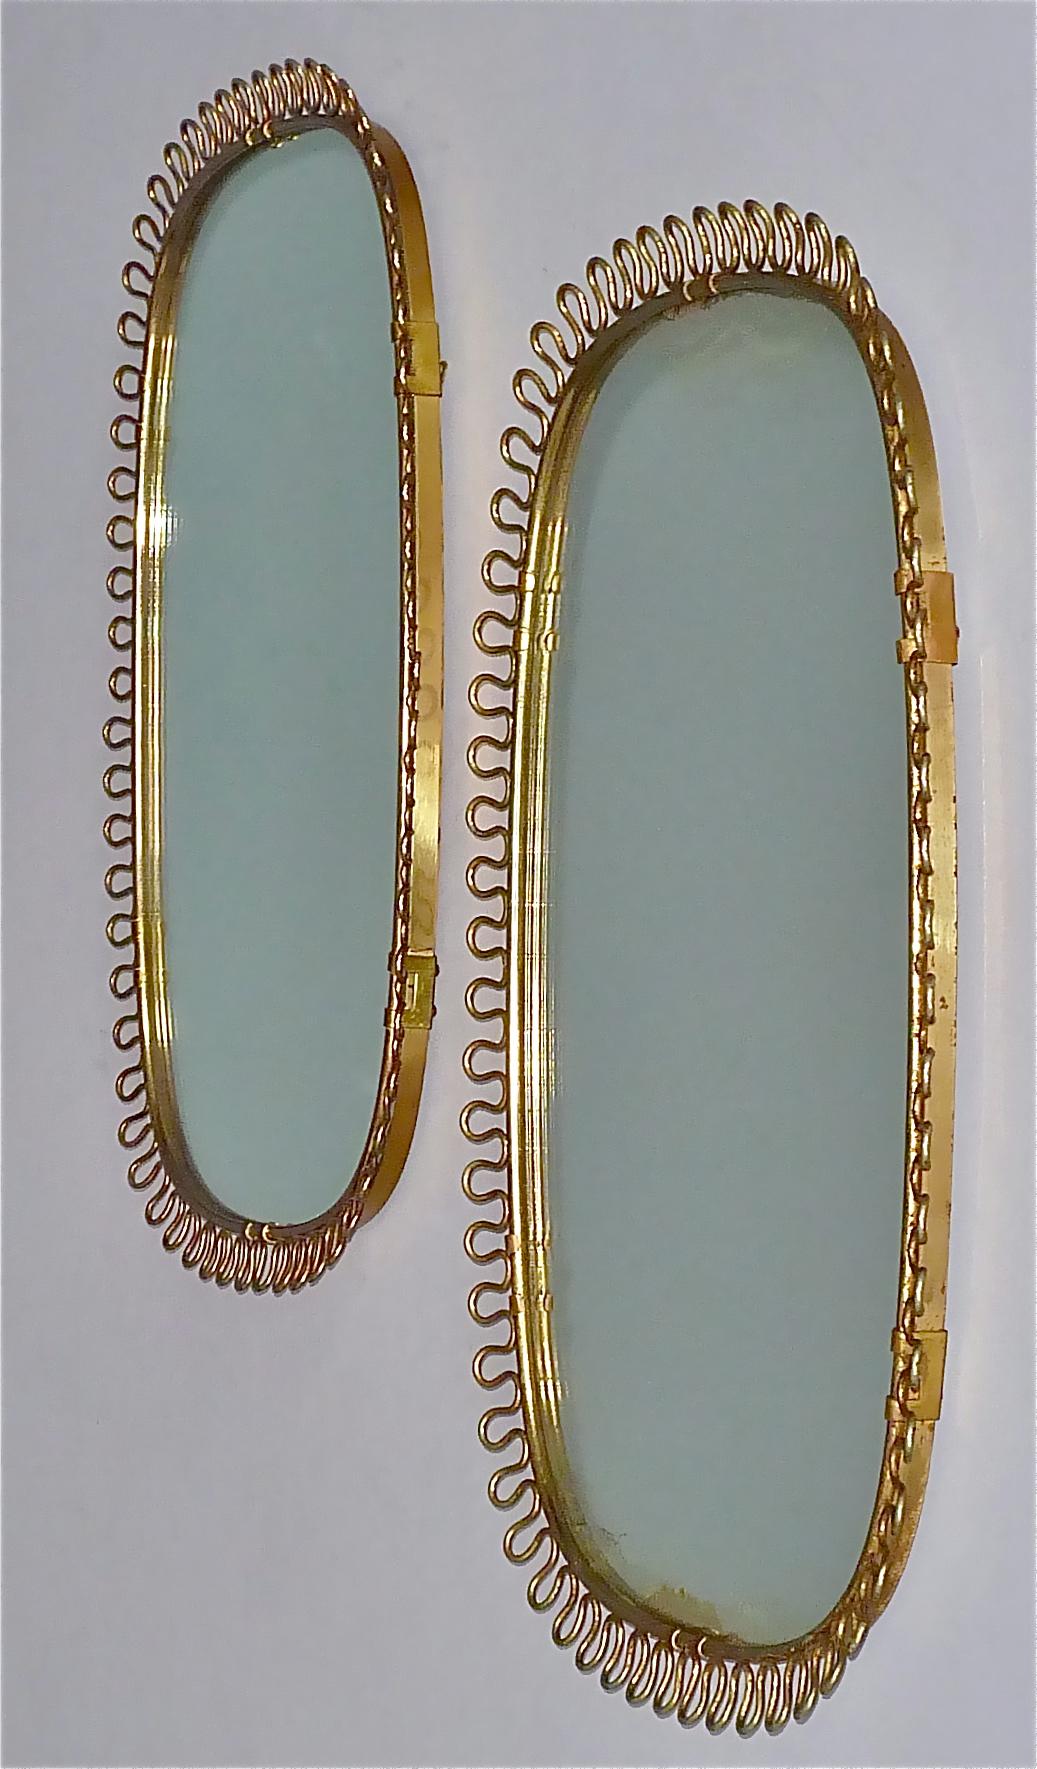 Patinated Midcentury Wall Mirrors by Josef Frank for Svenskt Tenn Sweden Brass 1950s, Pair